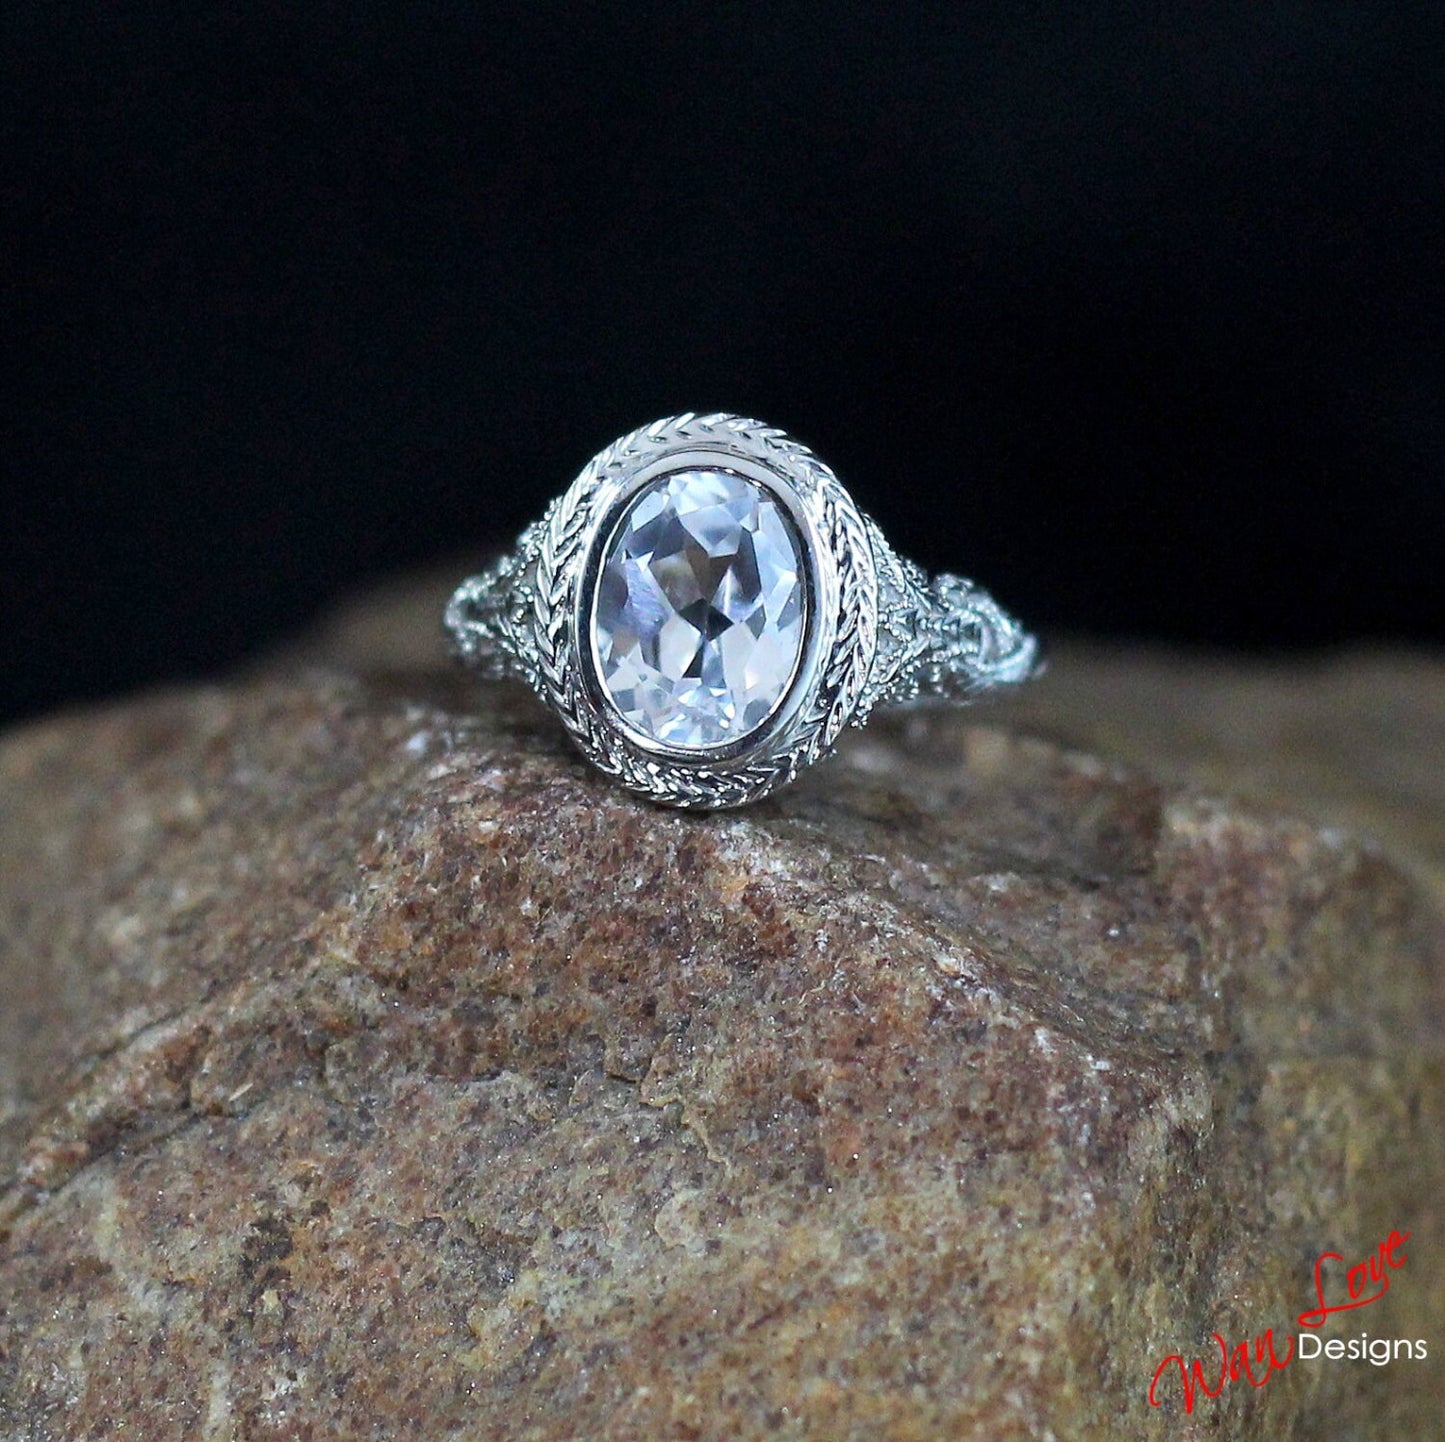 White Sapphire Oval Bezel Filigree Milgrain Solitaire Engagement Ring 3ct 9x7mm Bridal promise ring Wedding Anniversary Gift Ready to ship